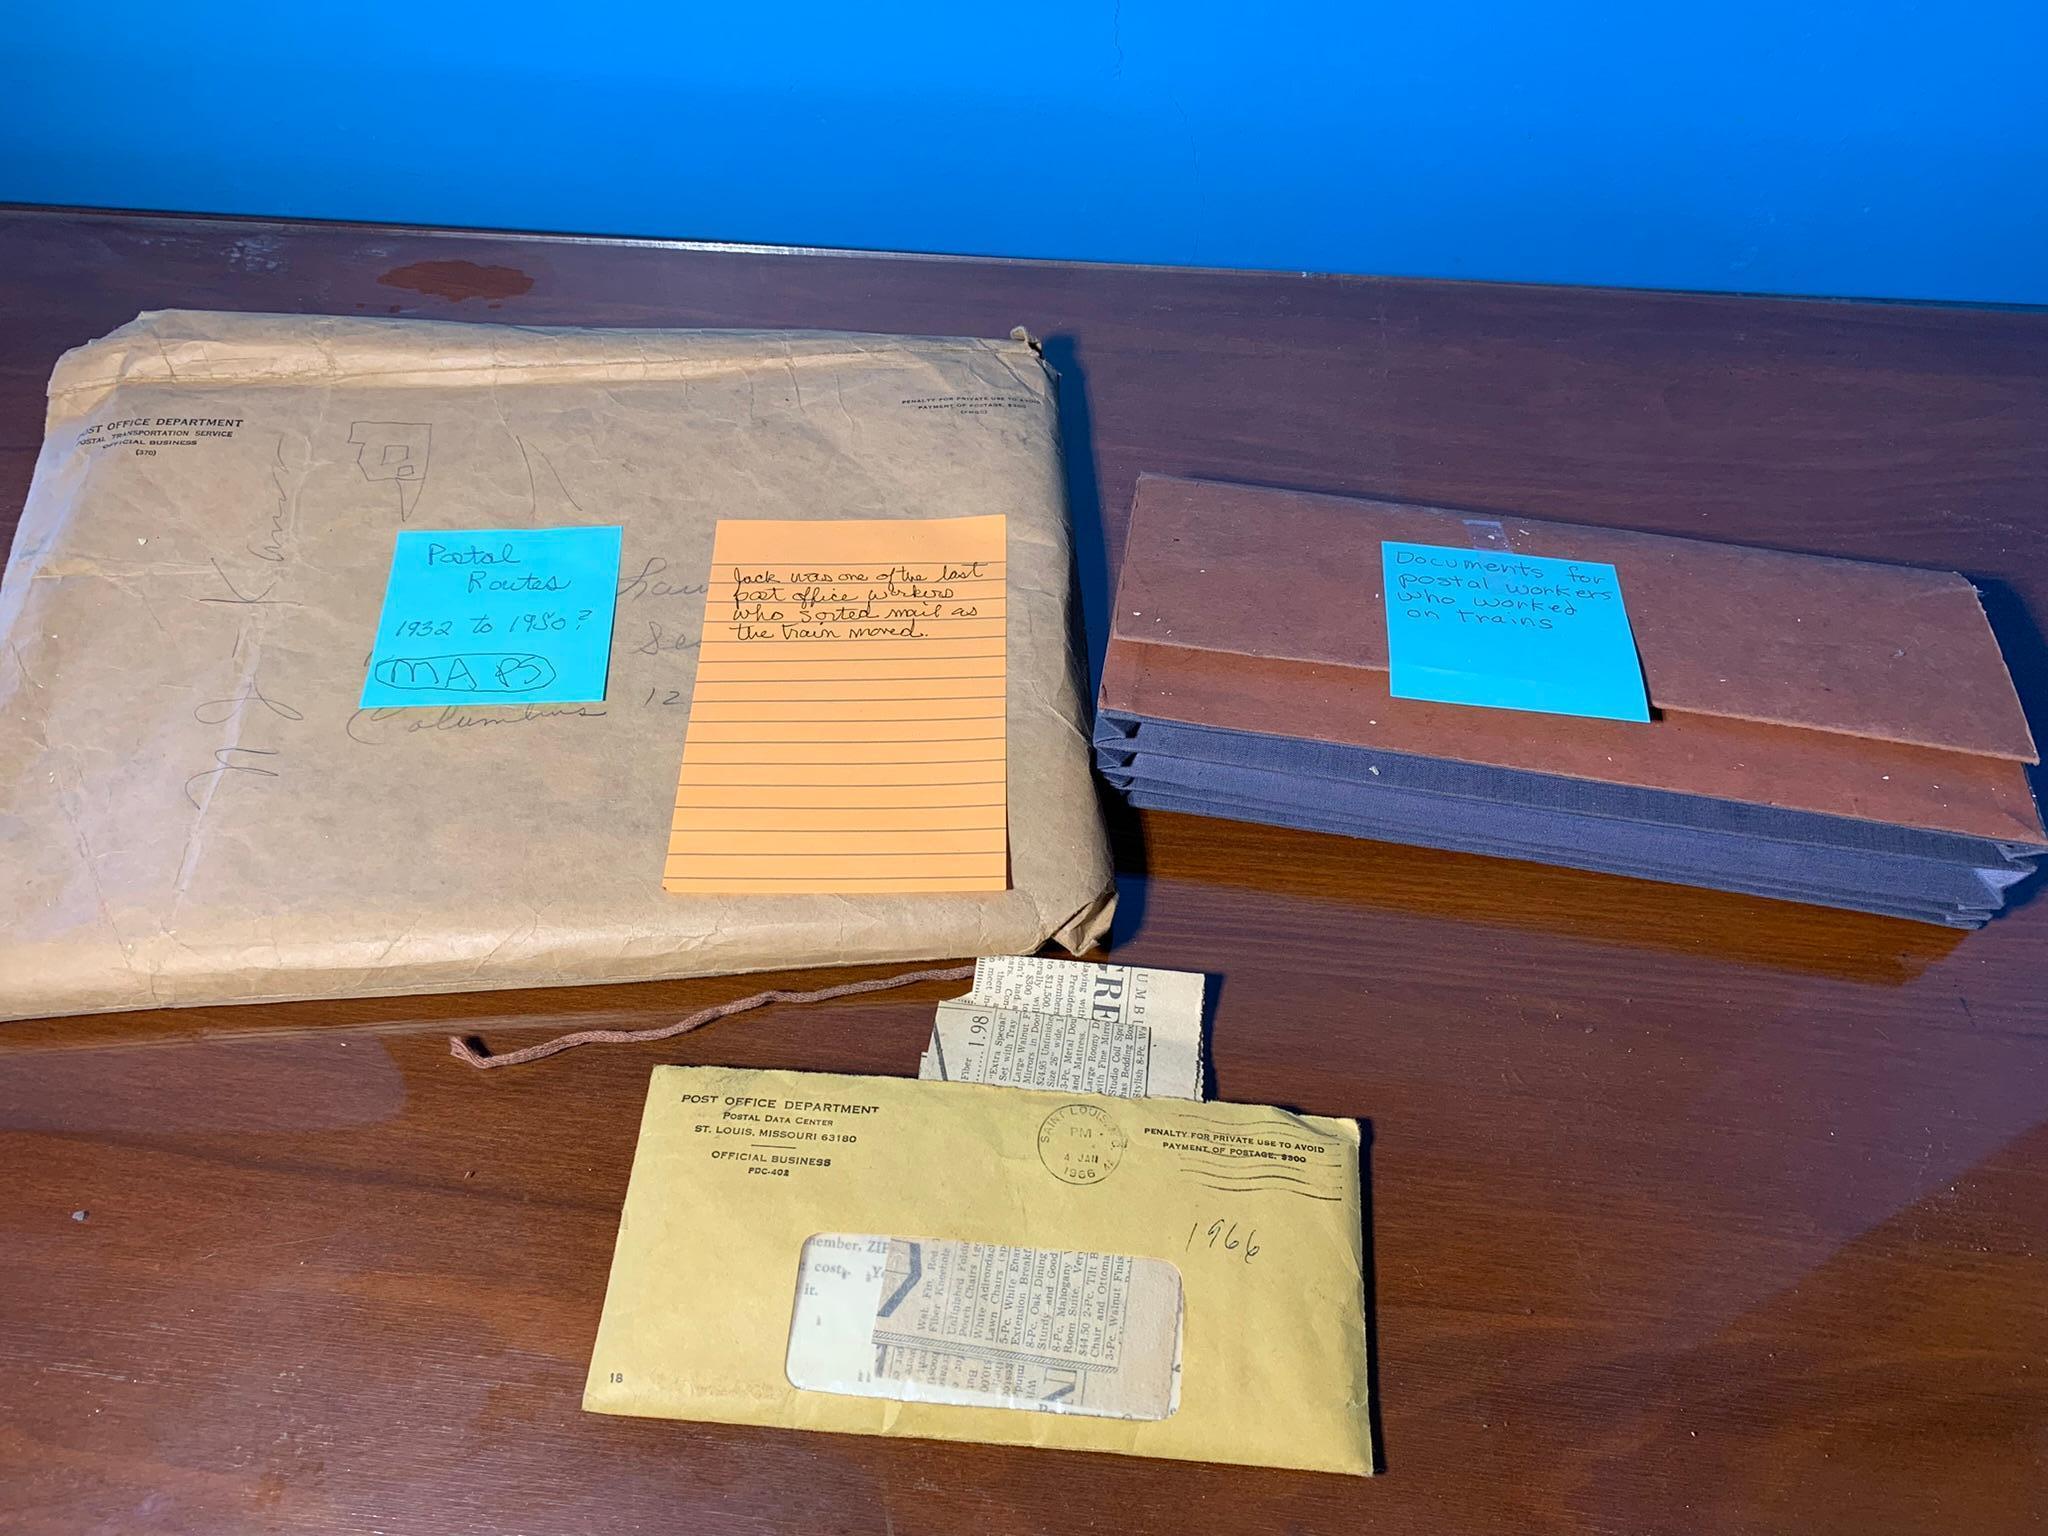 Group of Documents for Postal Workers who Worked on Trains